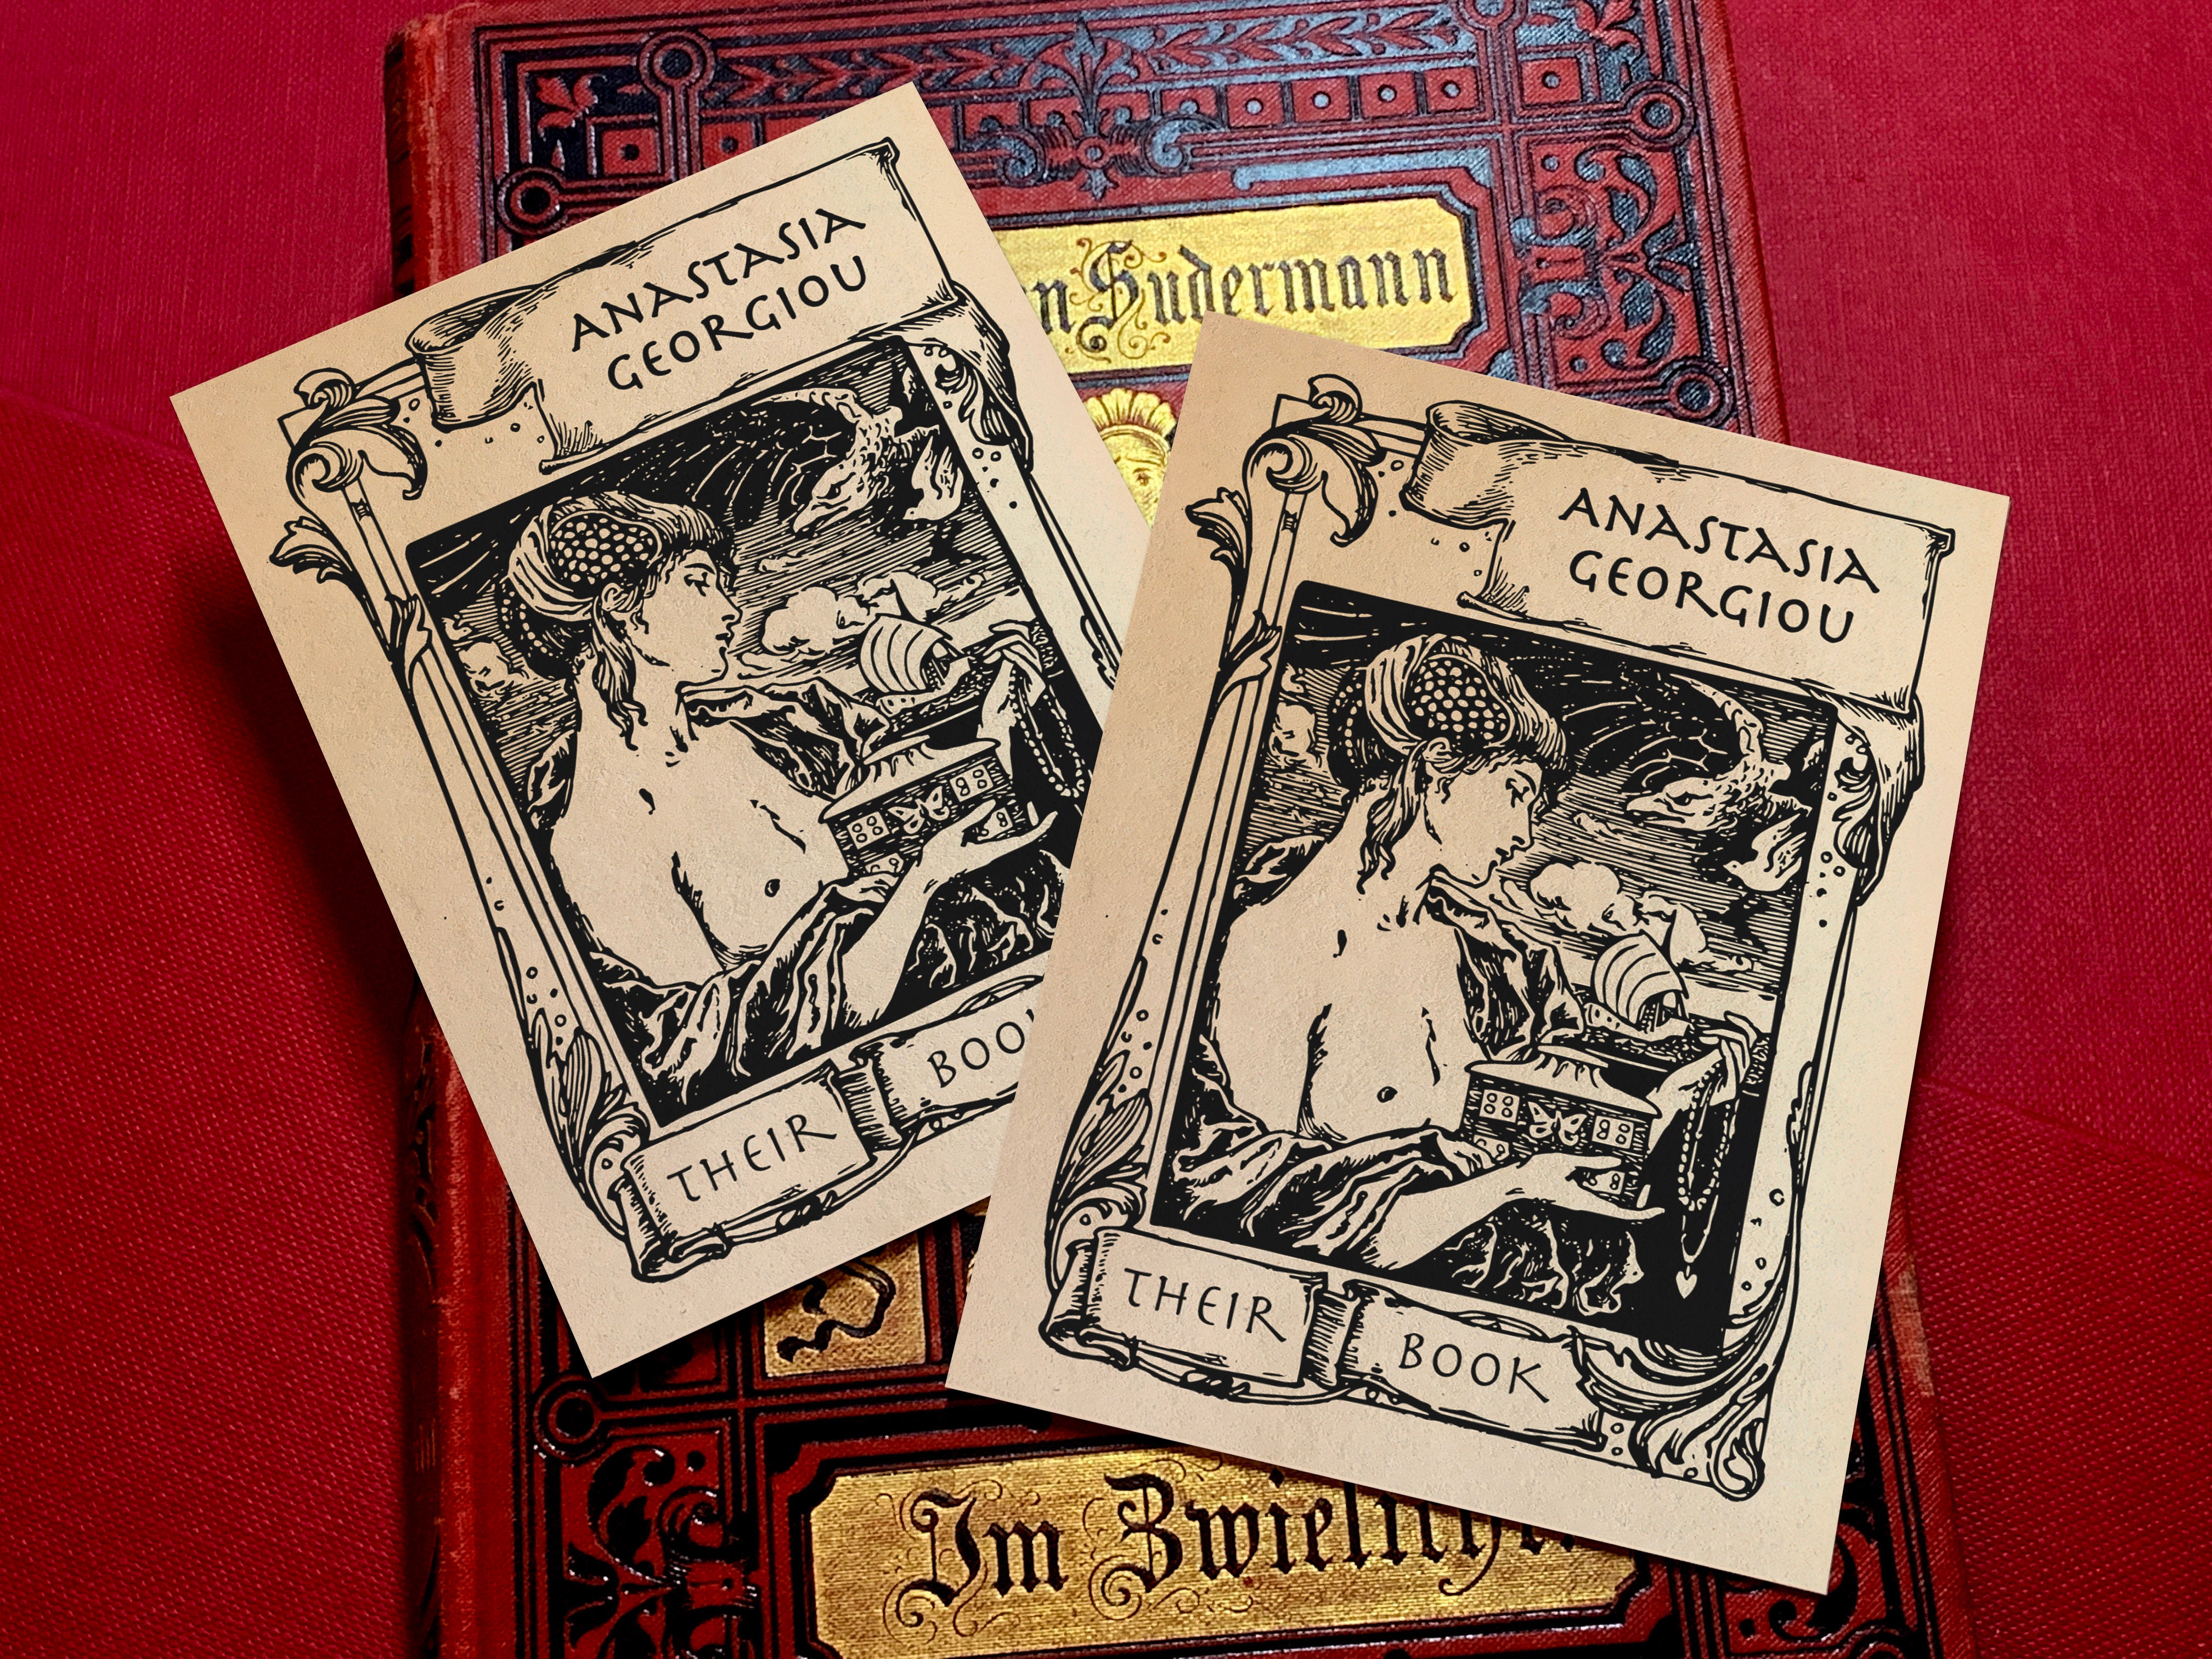 Pandora's Box, Personalized Ex-Libris Bookplates, Crafted on Traditional Gummed Paper, 3in x 4in, Set of 30